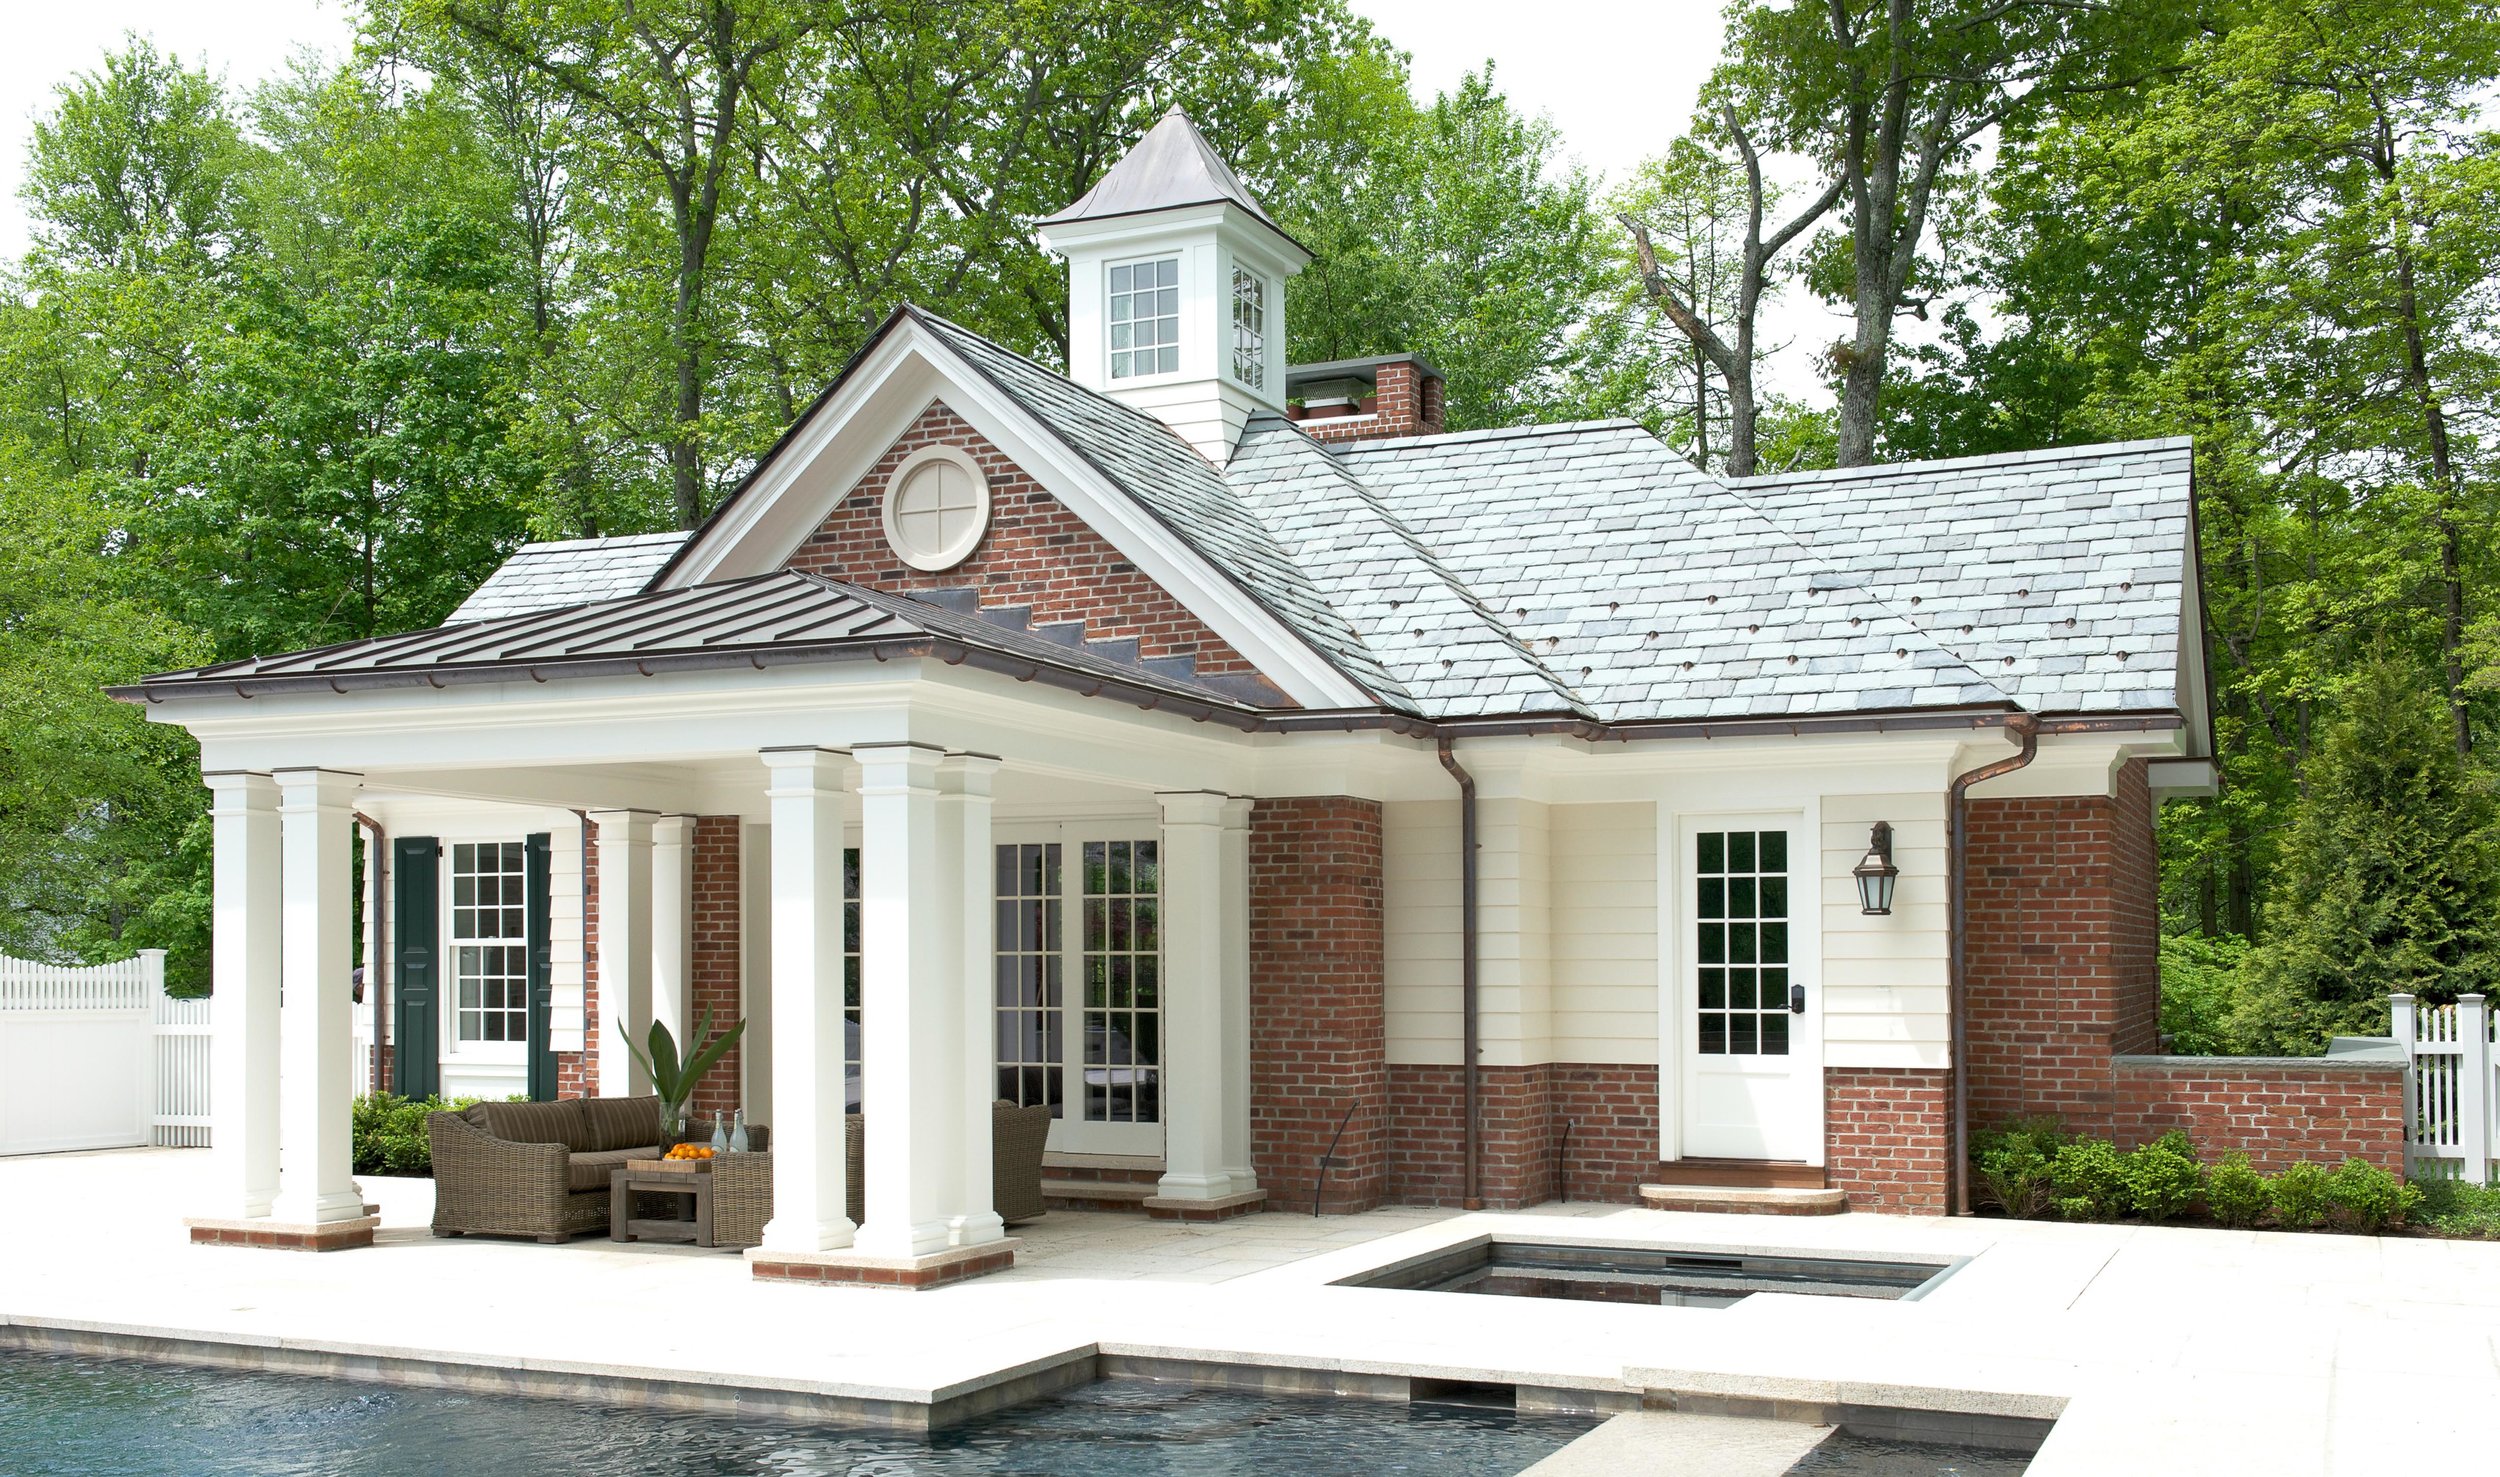 Brick pool house with slate and copper roof